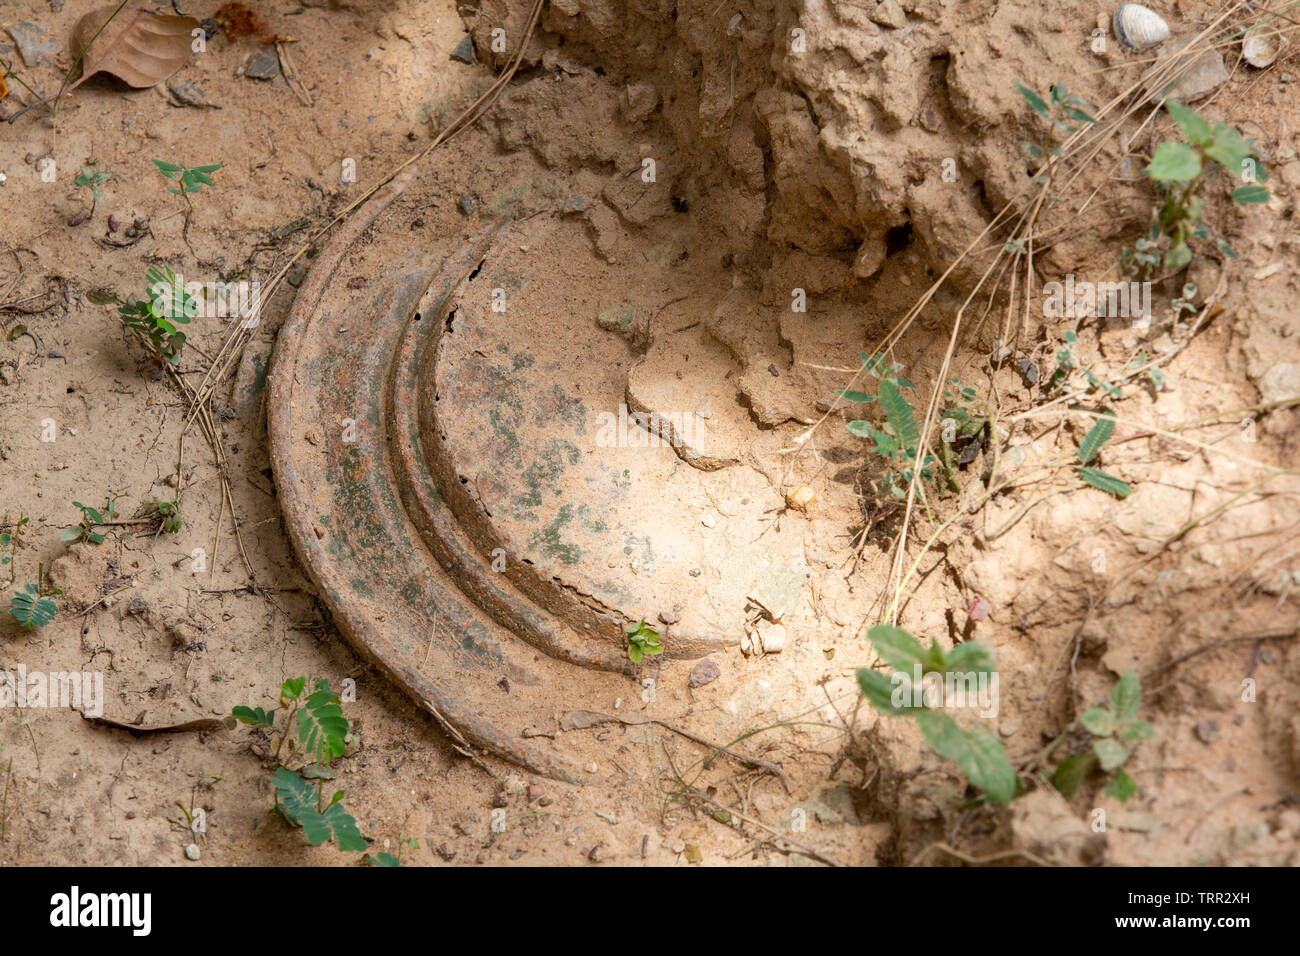 anti tank mine partly buried in the ground Stock Photo